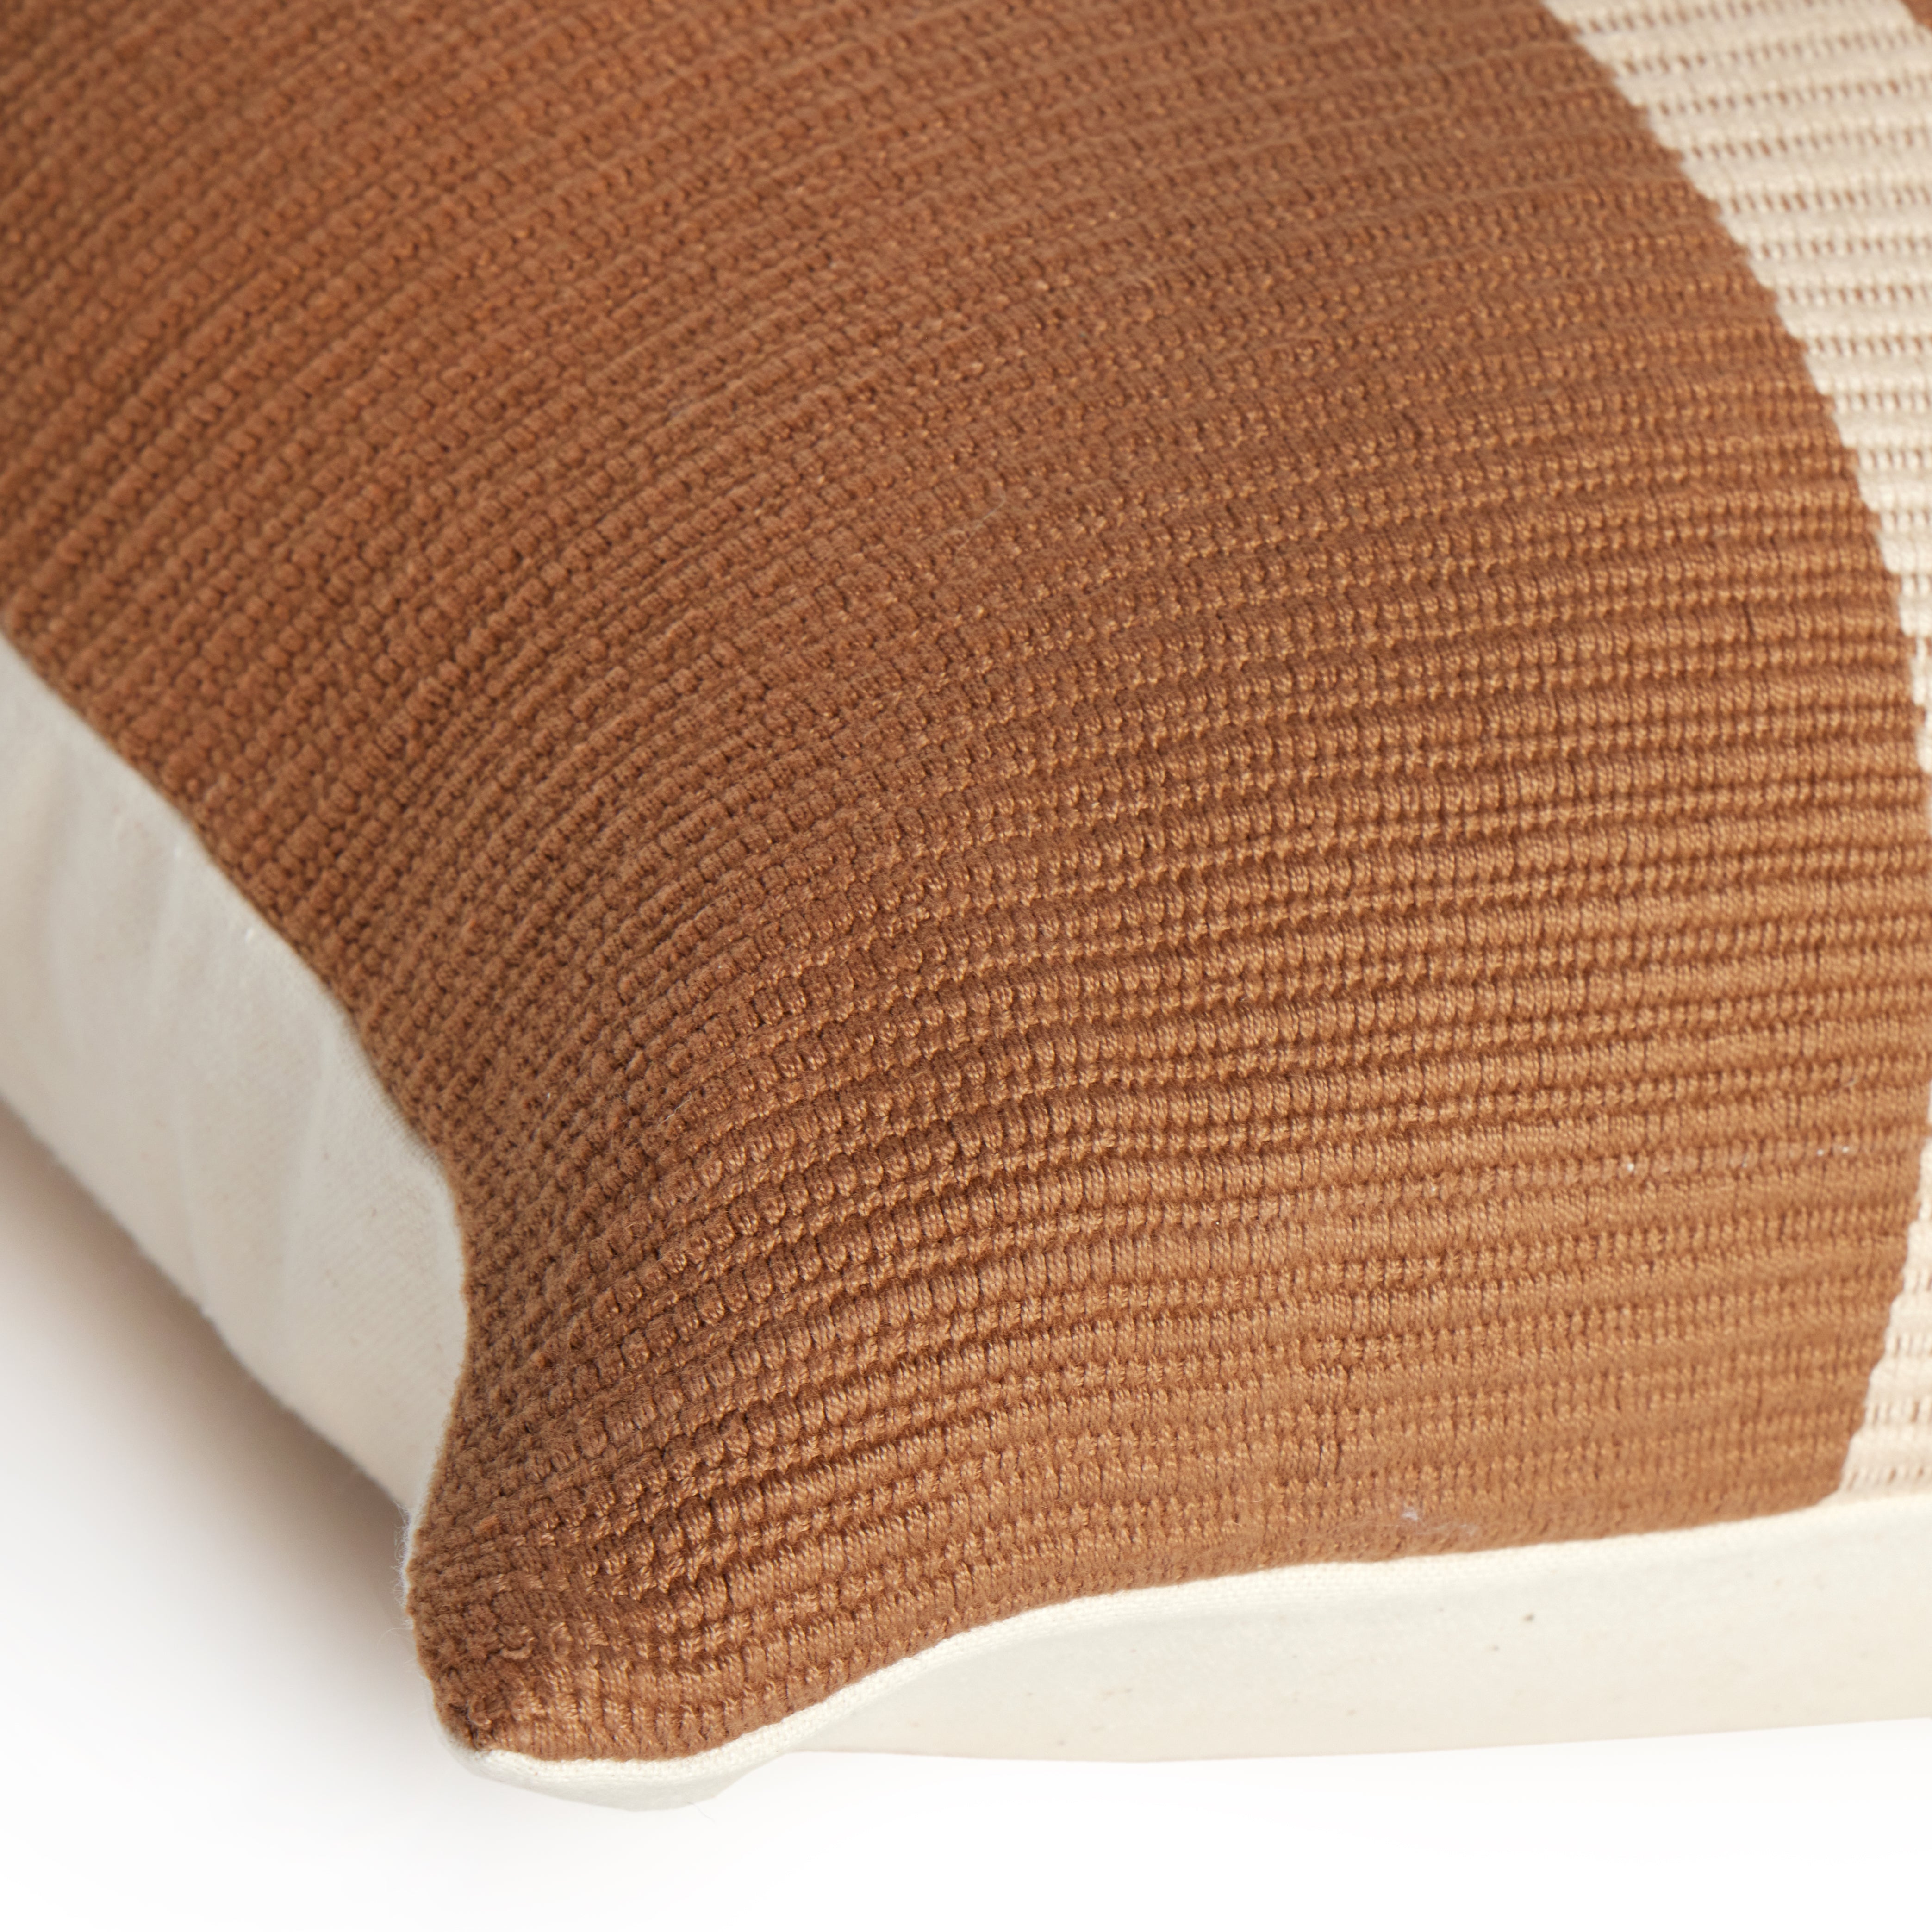 Madeline Handwoven Pillow - Taupe